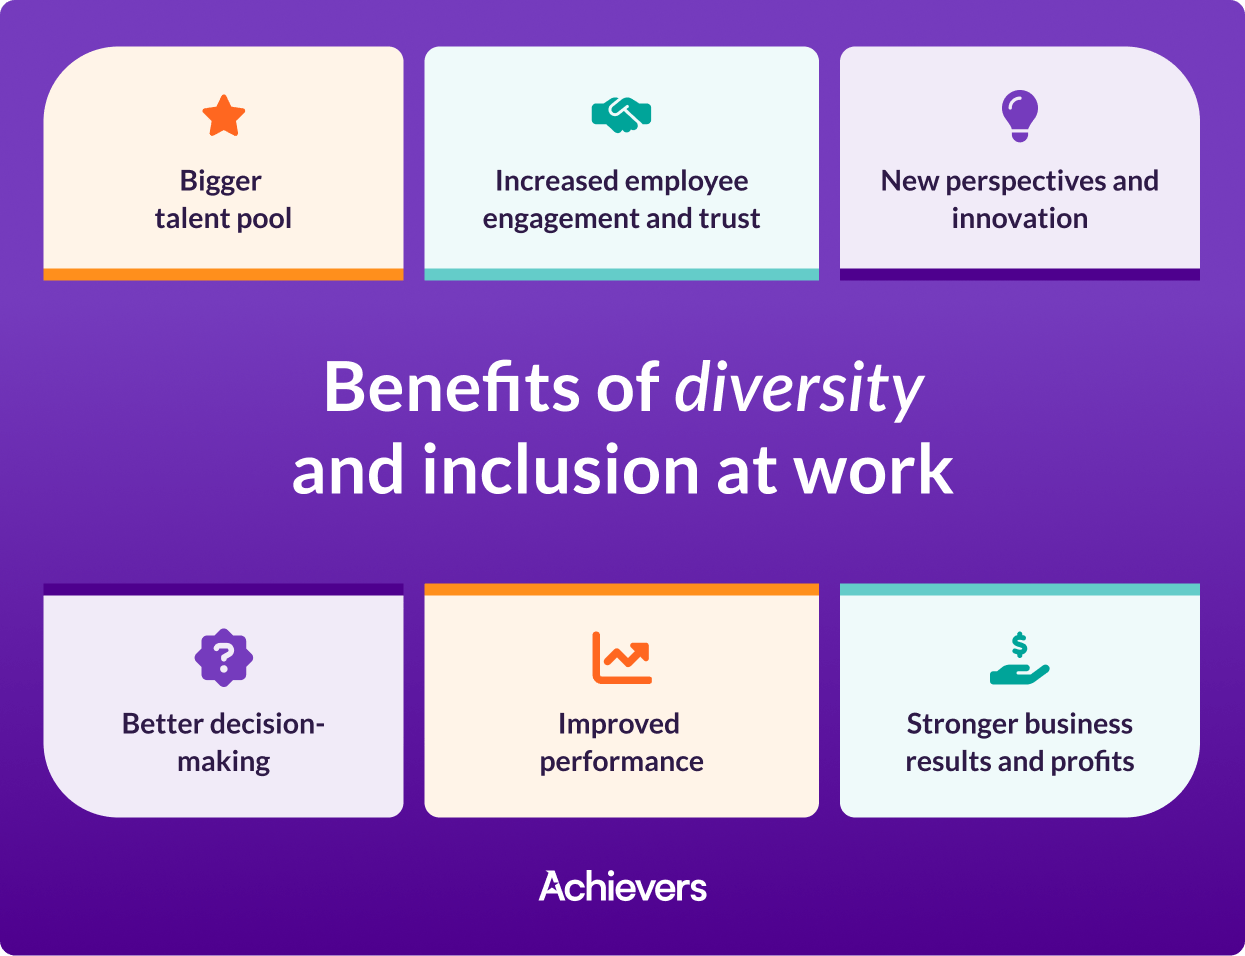 Benefits of diversity and inclusion in the workplace